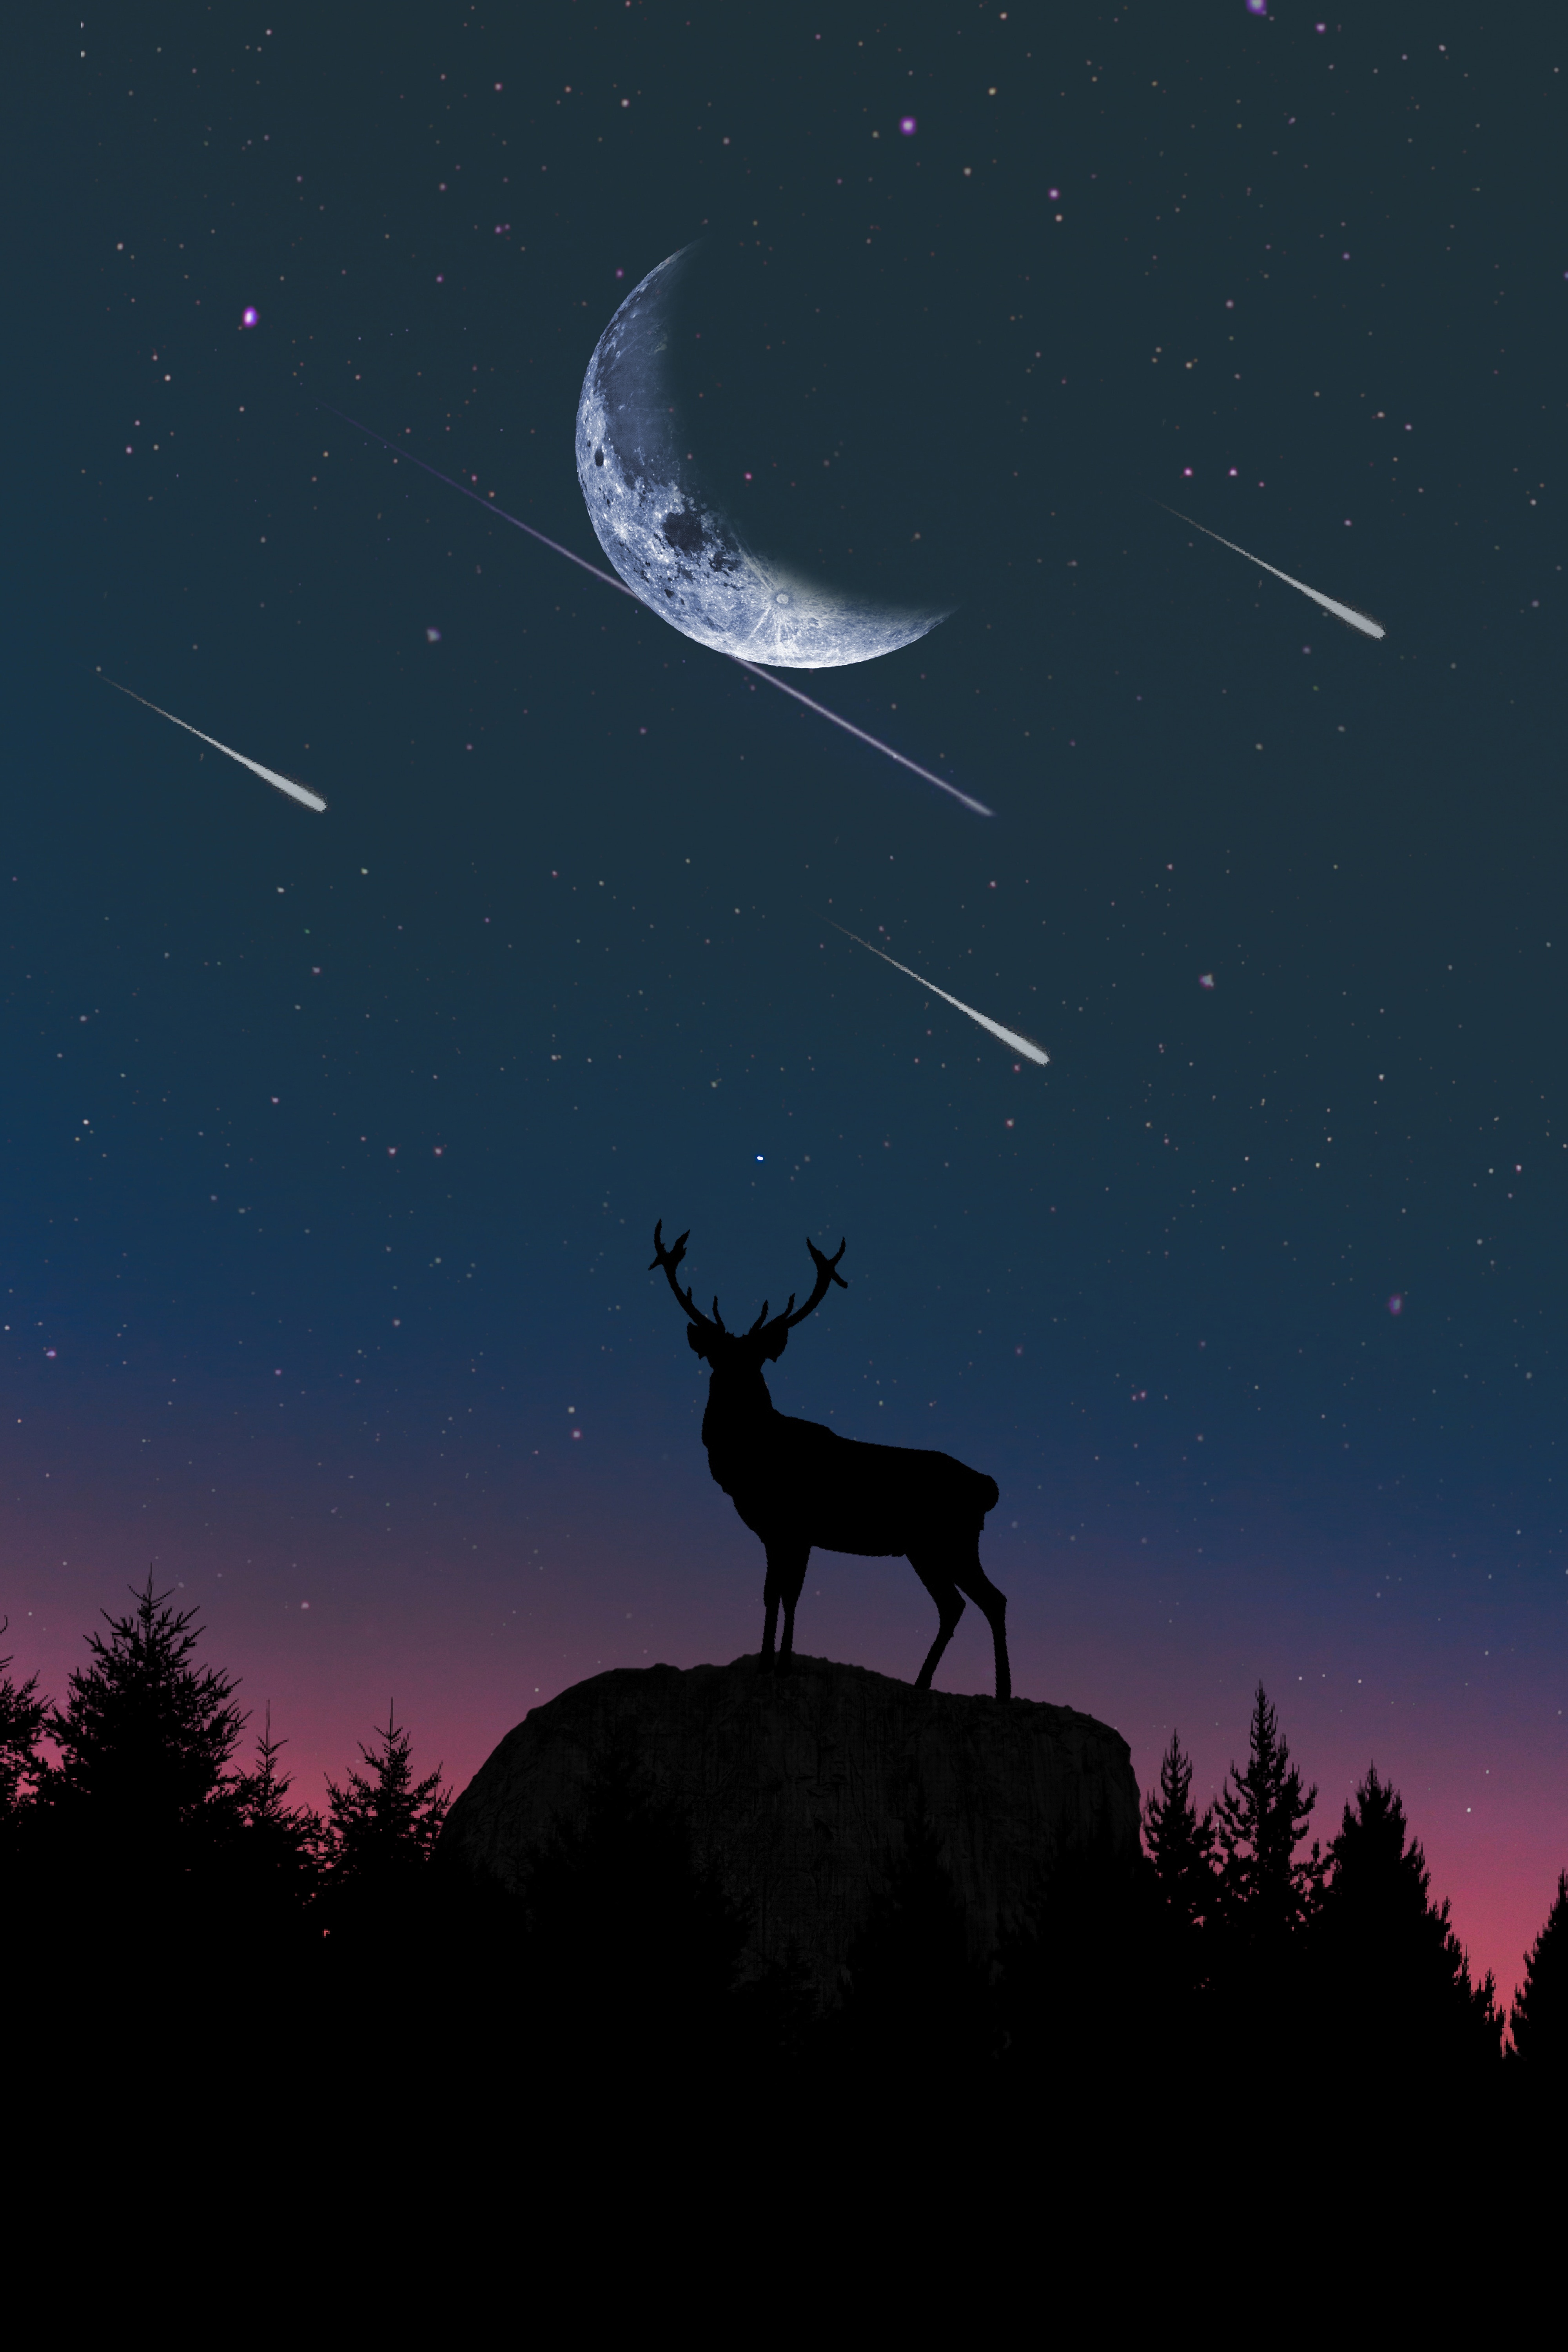 93158 download wallpaper twilight, vector, deer, moon, silhouette, dusk, hill screensavers and pictures for free